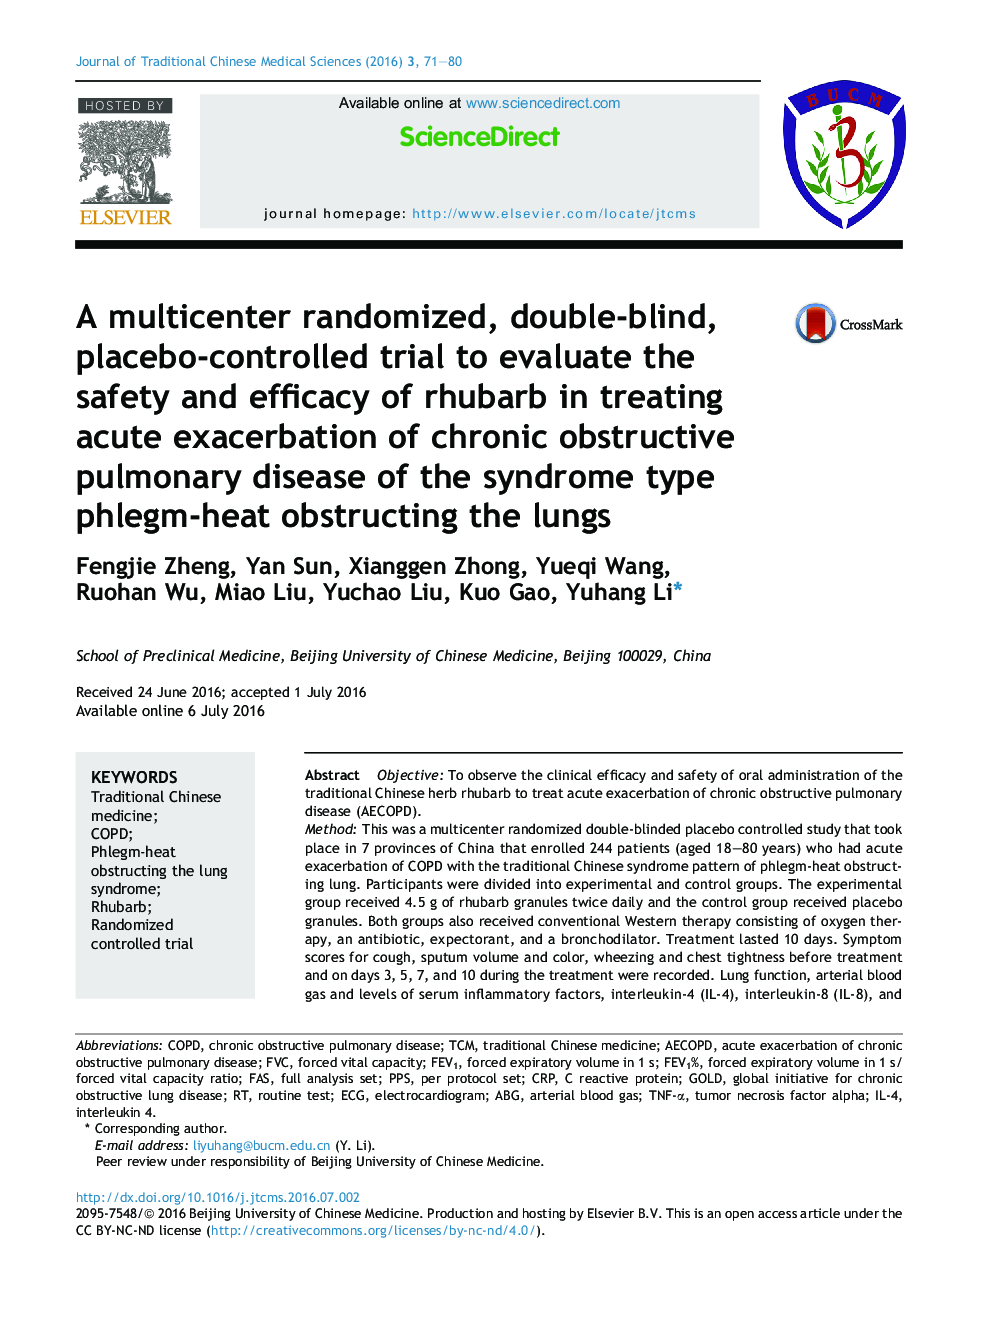 A multicenter randomized, double-blind, placebo-controlled trial to evaluate the safety and efficacy of rhubarb in treating acute exacerbation of chronic obstructive pulmonary disease of the syndrome type phlegm-heat obstructing the lungs 